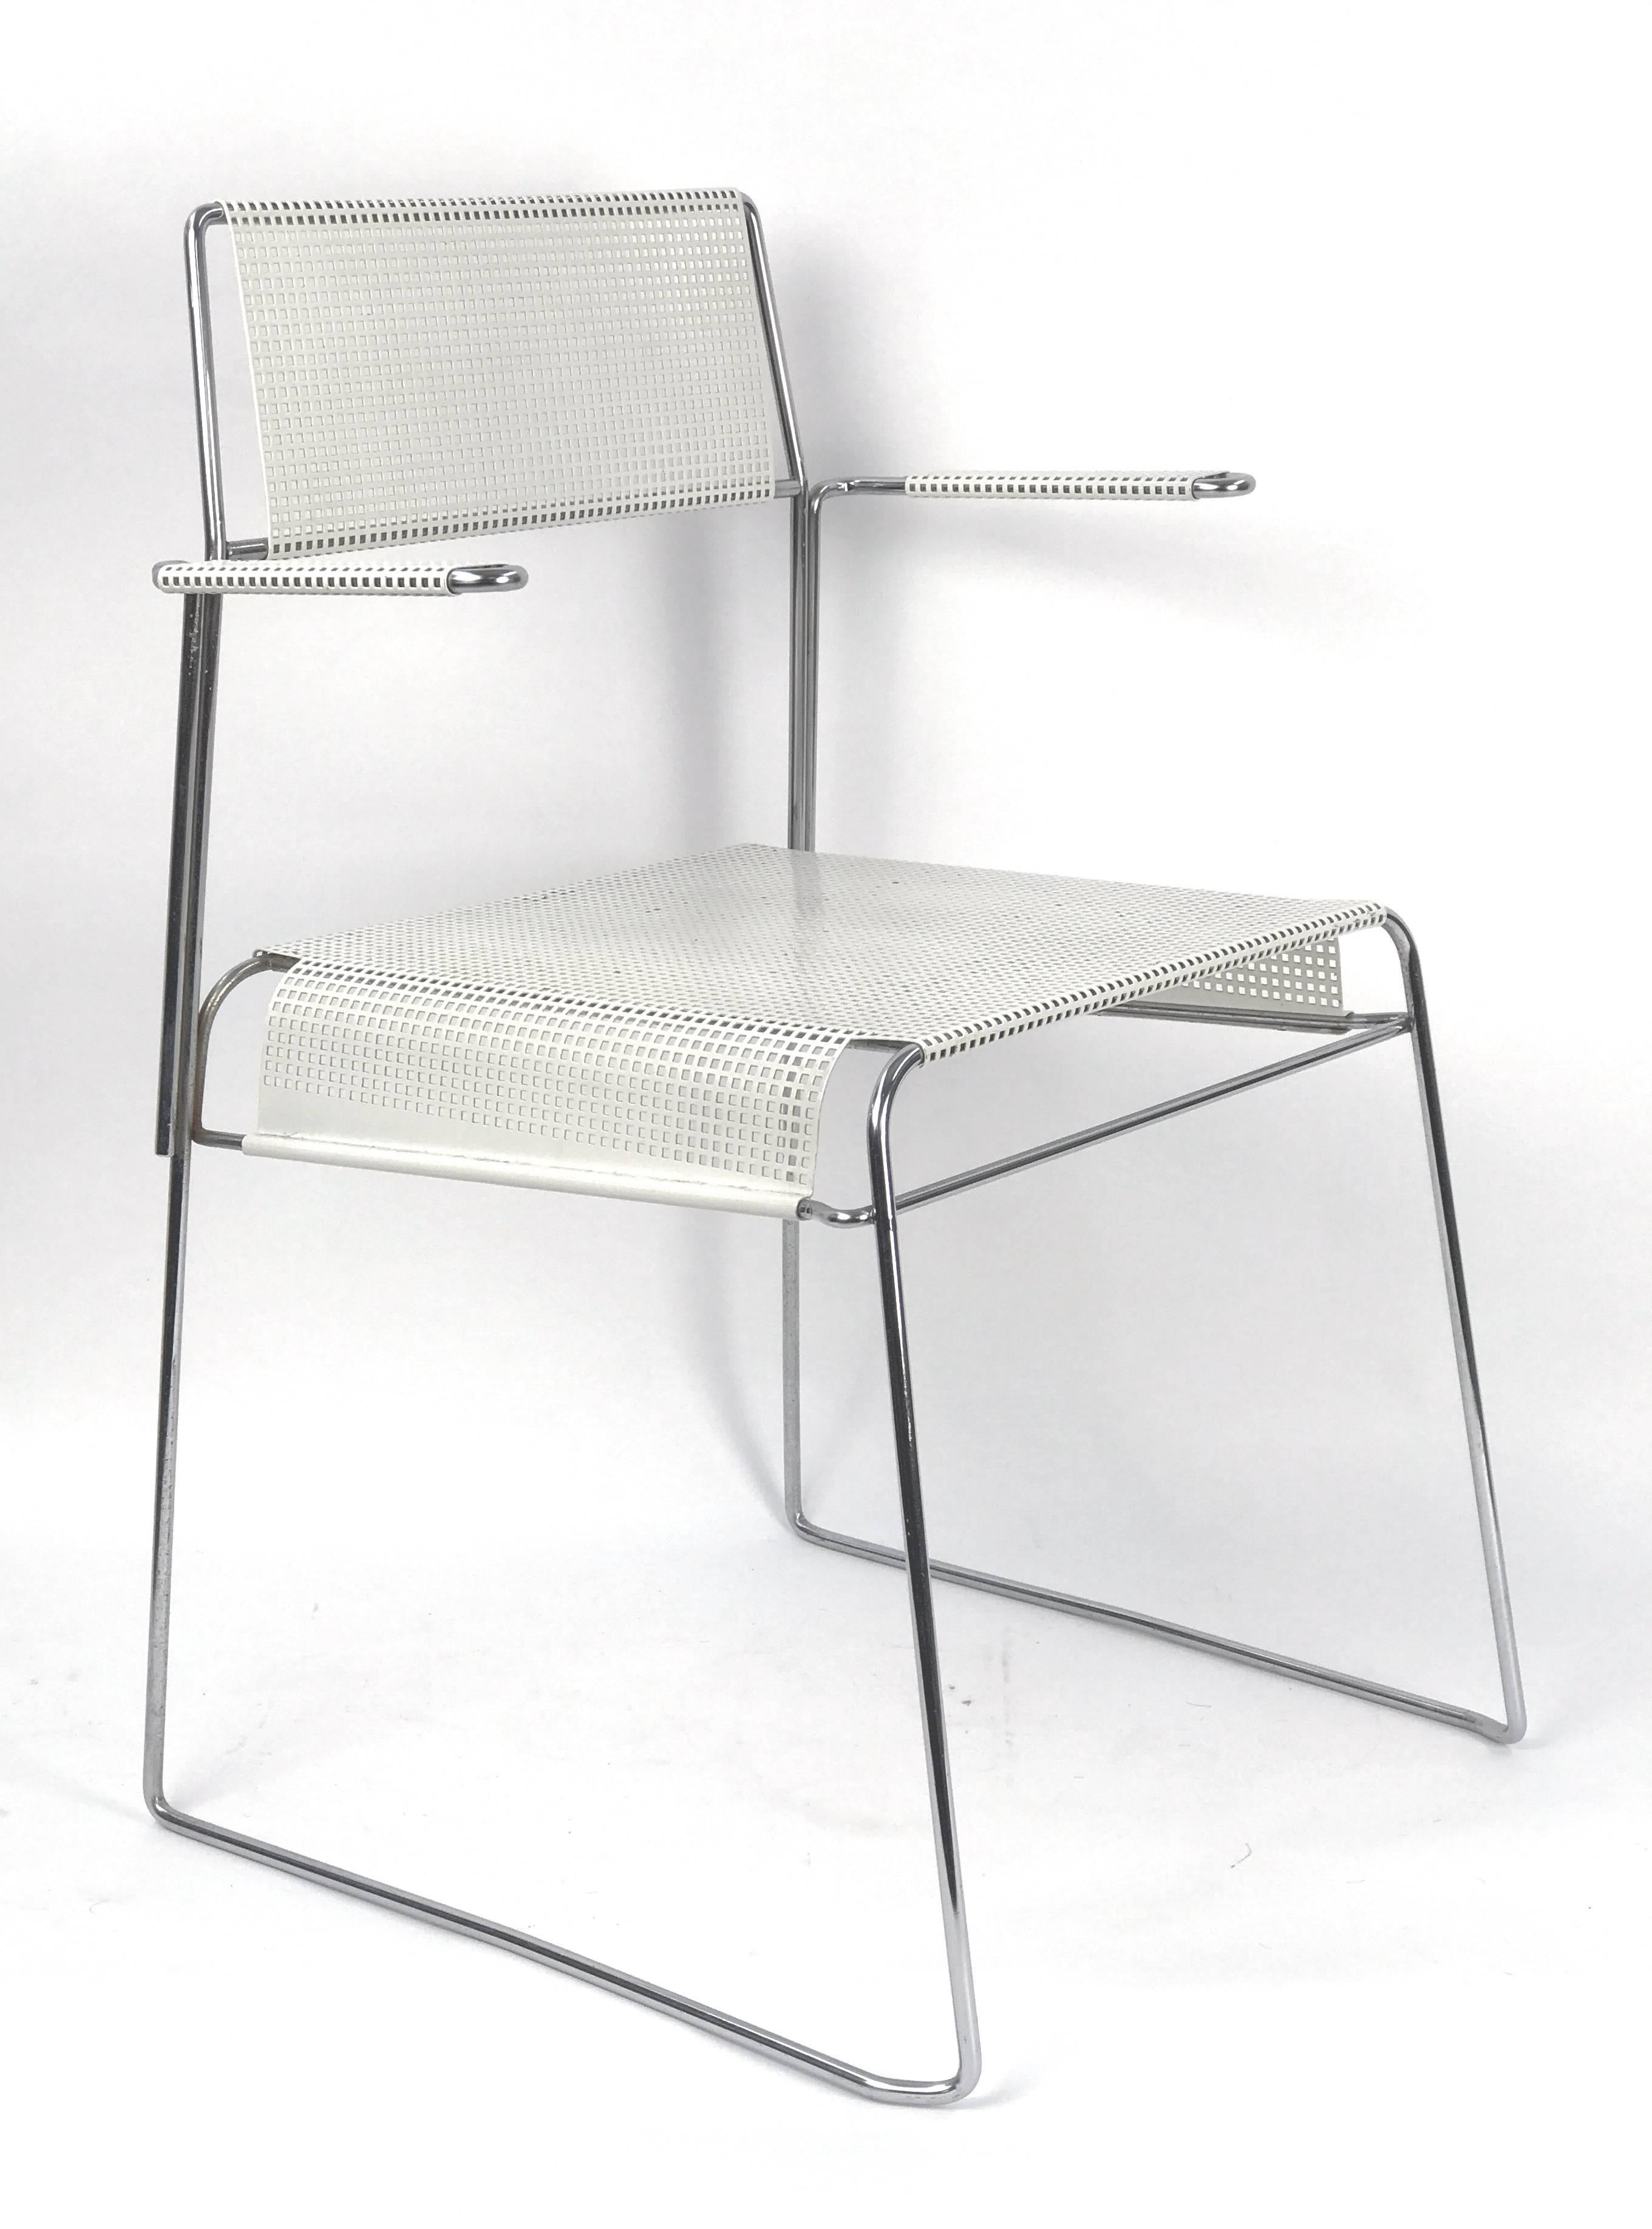 A dramatically handsome Mid-Century armchair in perforated white enameled metal on a polished chrome steel frame, in the manner of French designer Mathieu Matégot. Circa 1970s.

Armrest height 25.5 in.